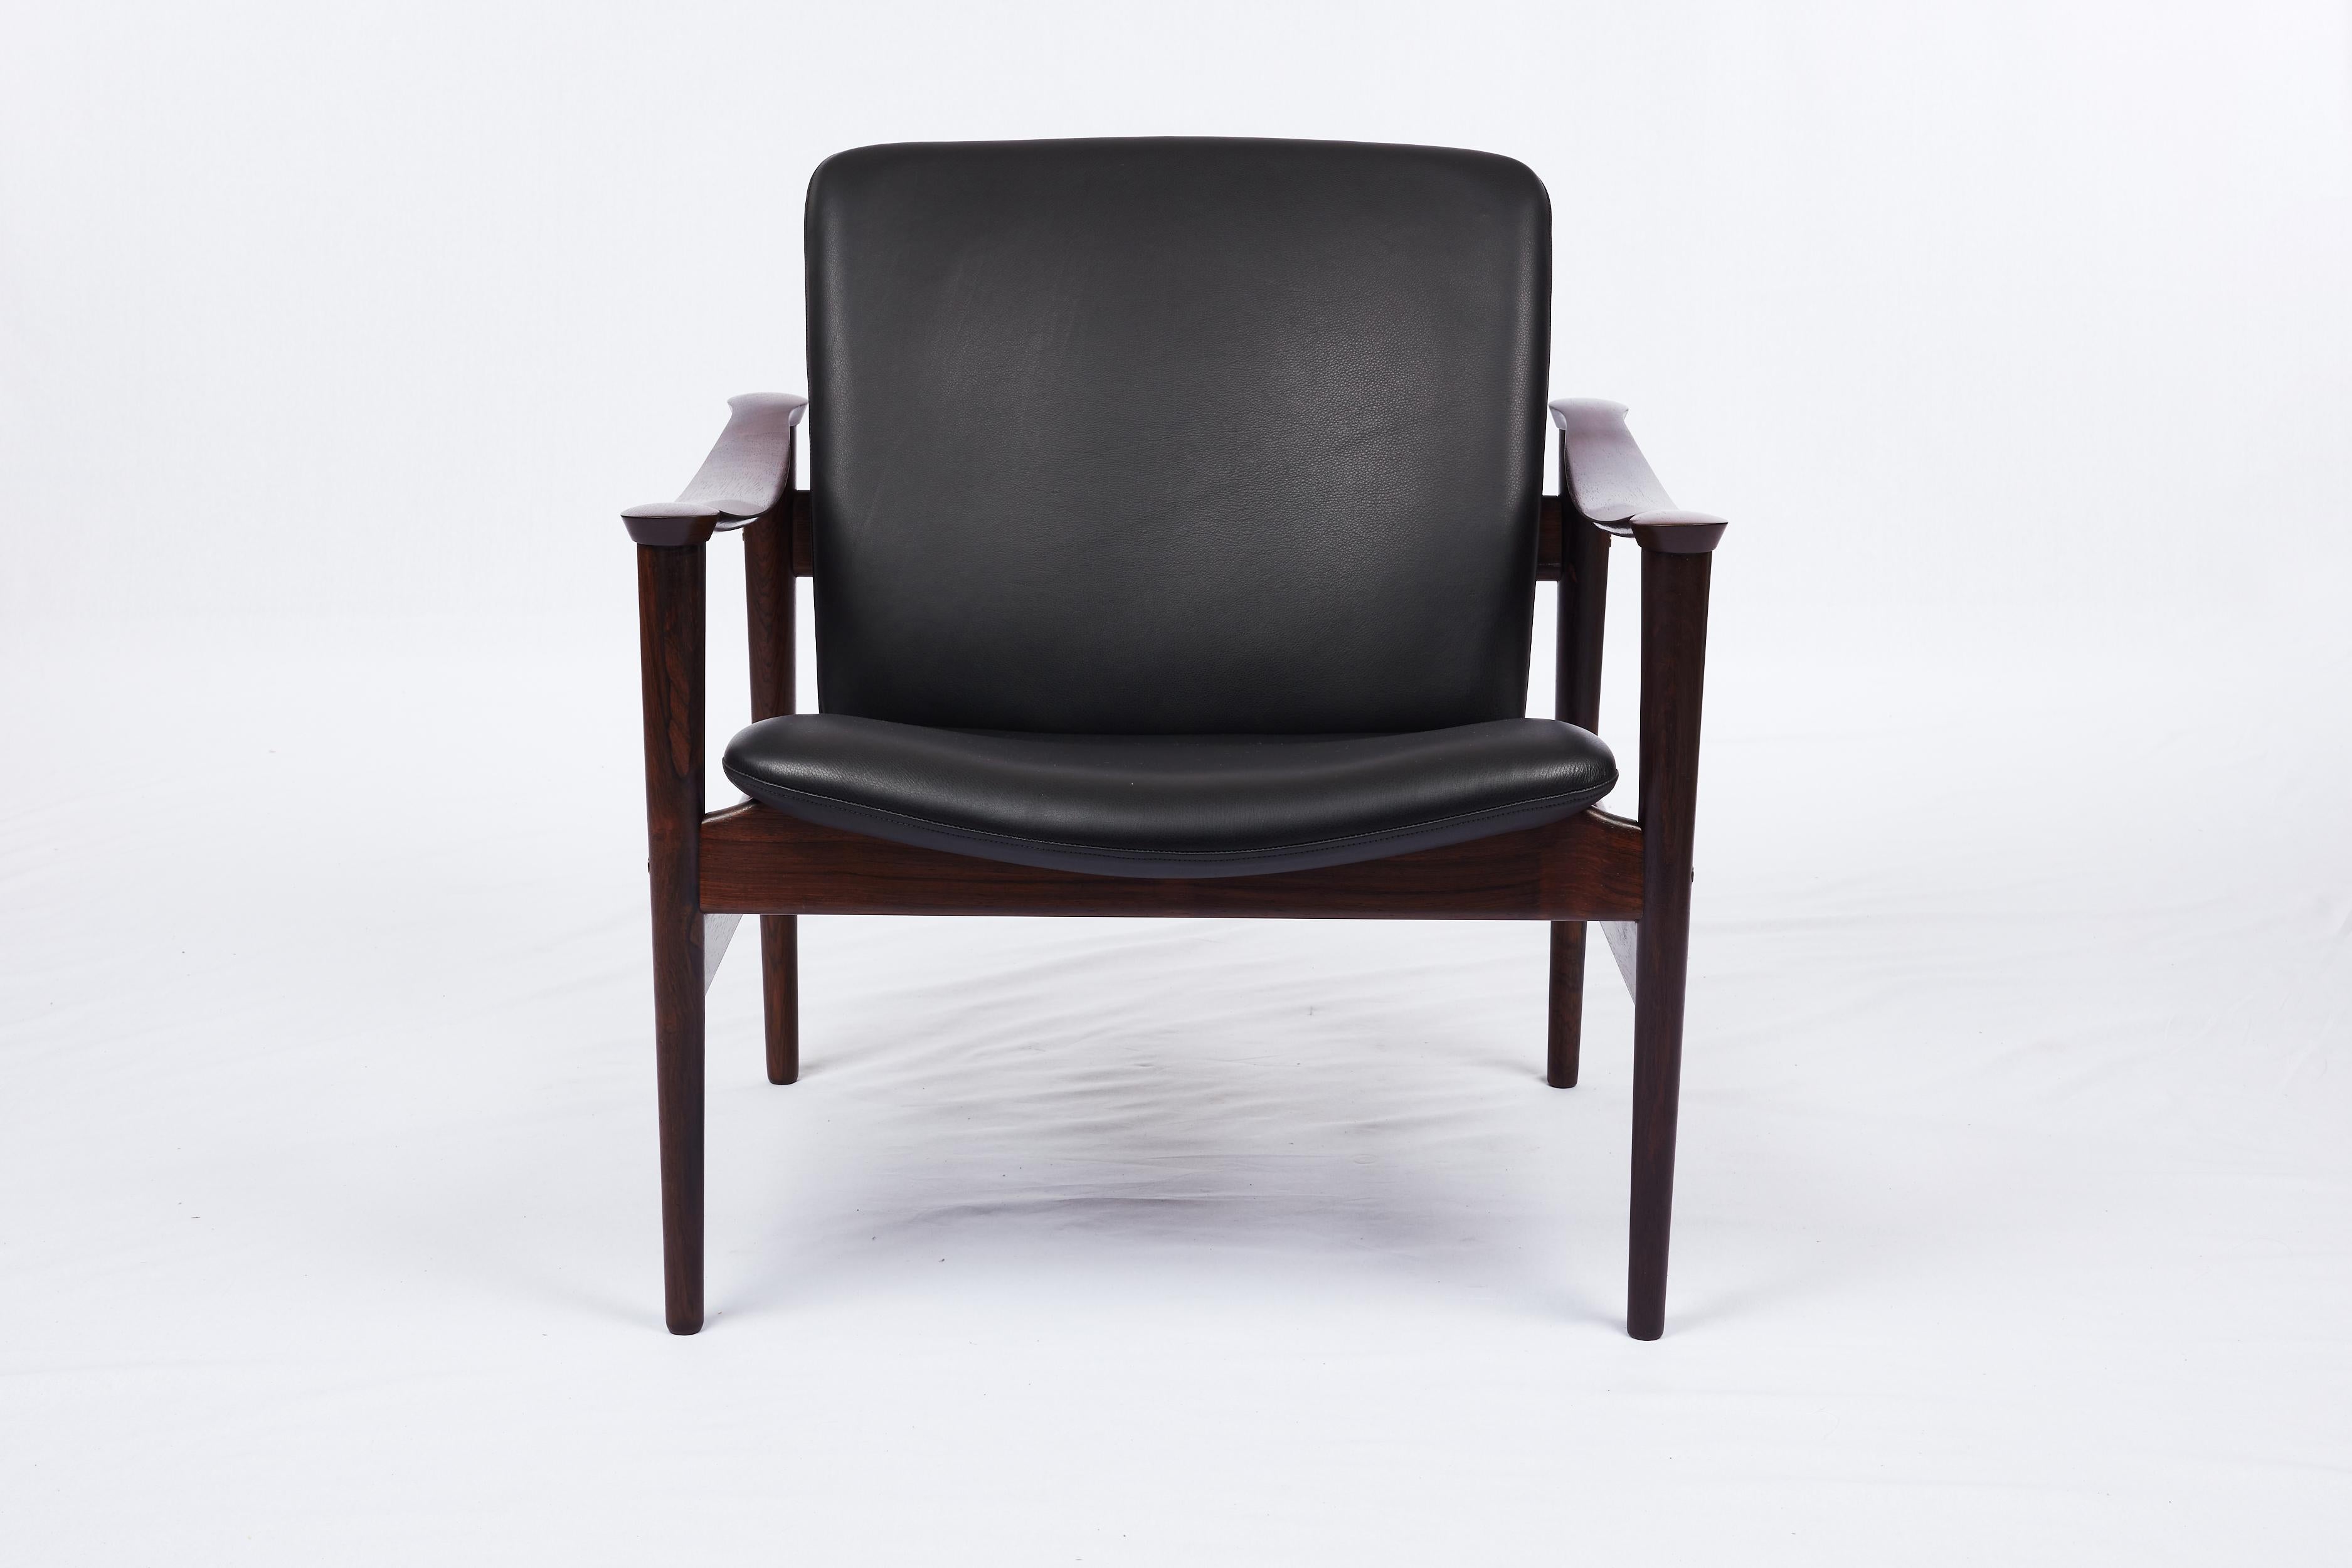 Fredrik Kayser rosewood lounge chair designed in 1961 and Produced by Vatne.